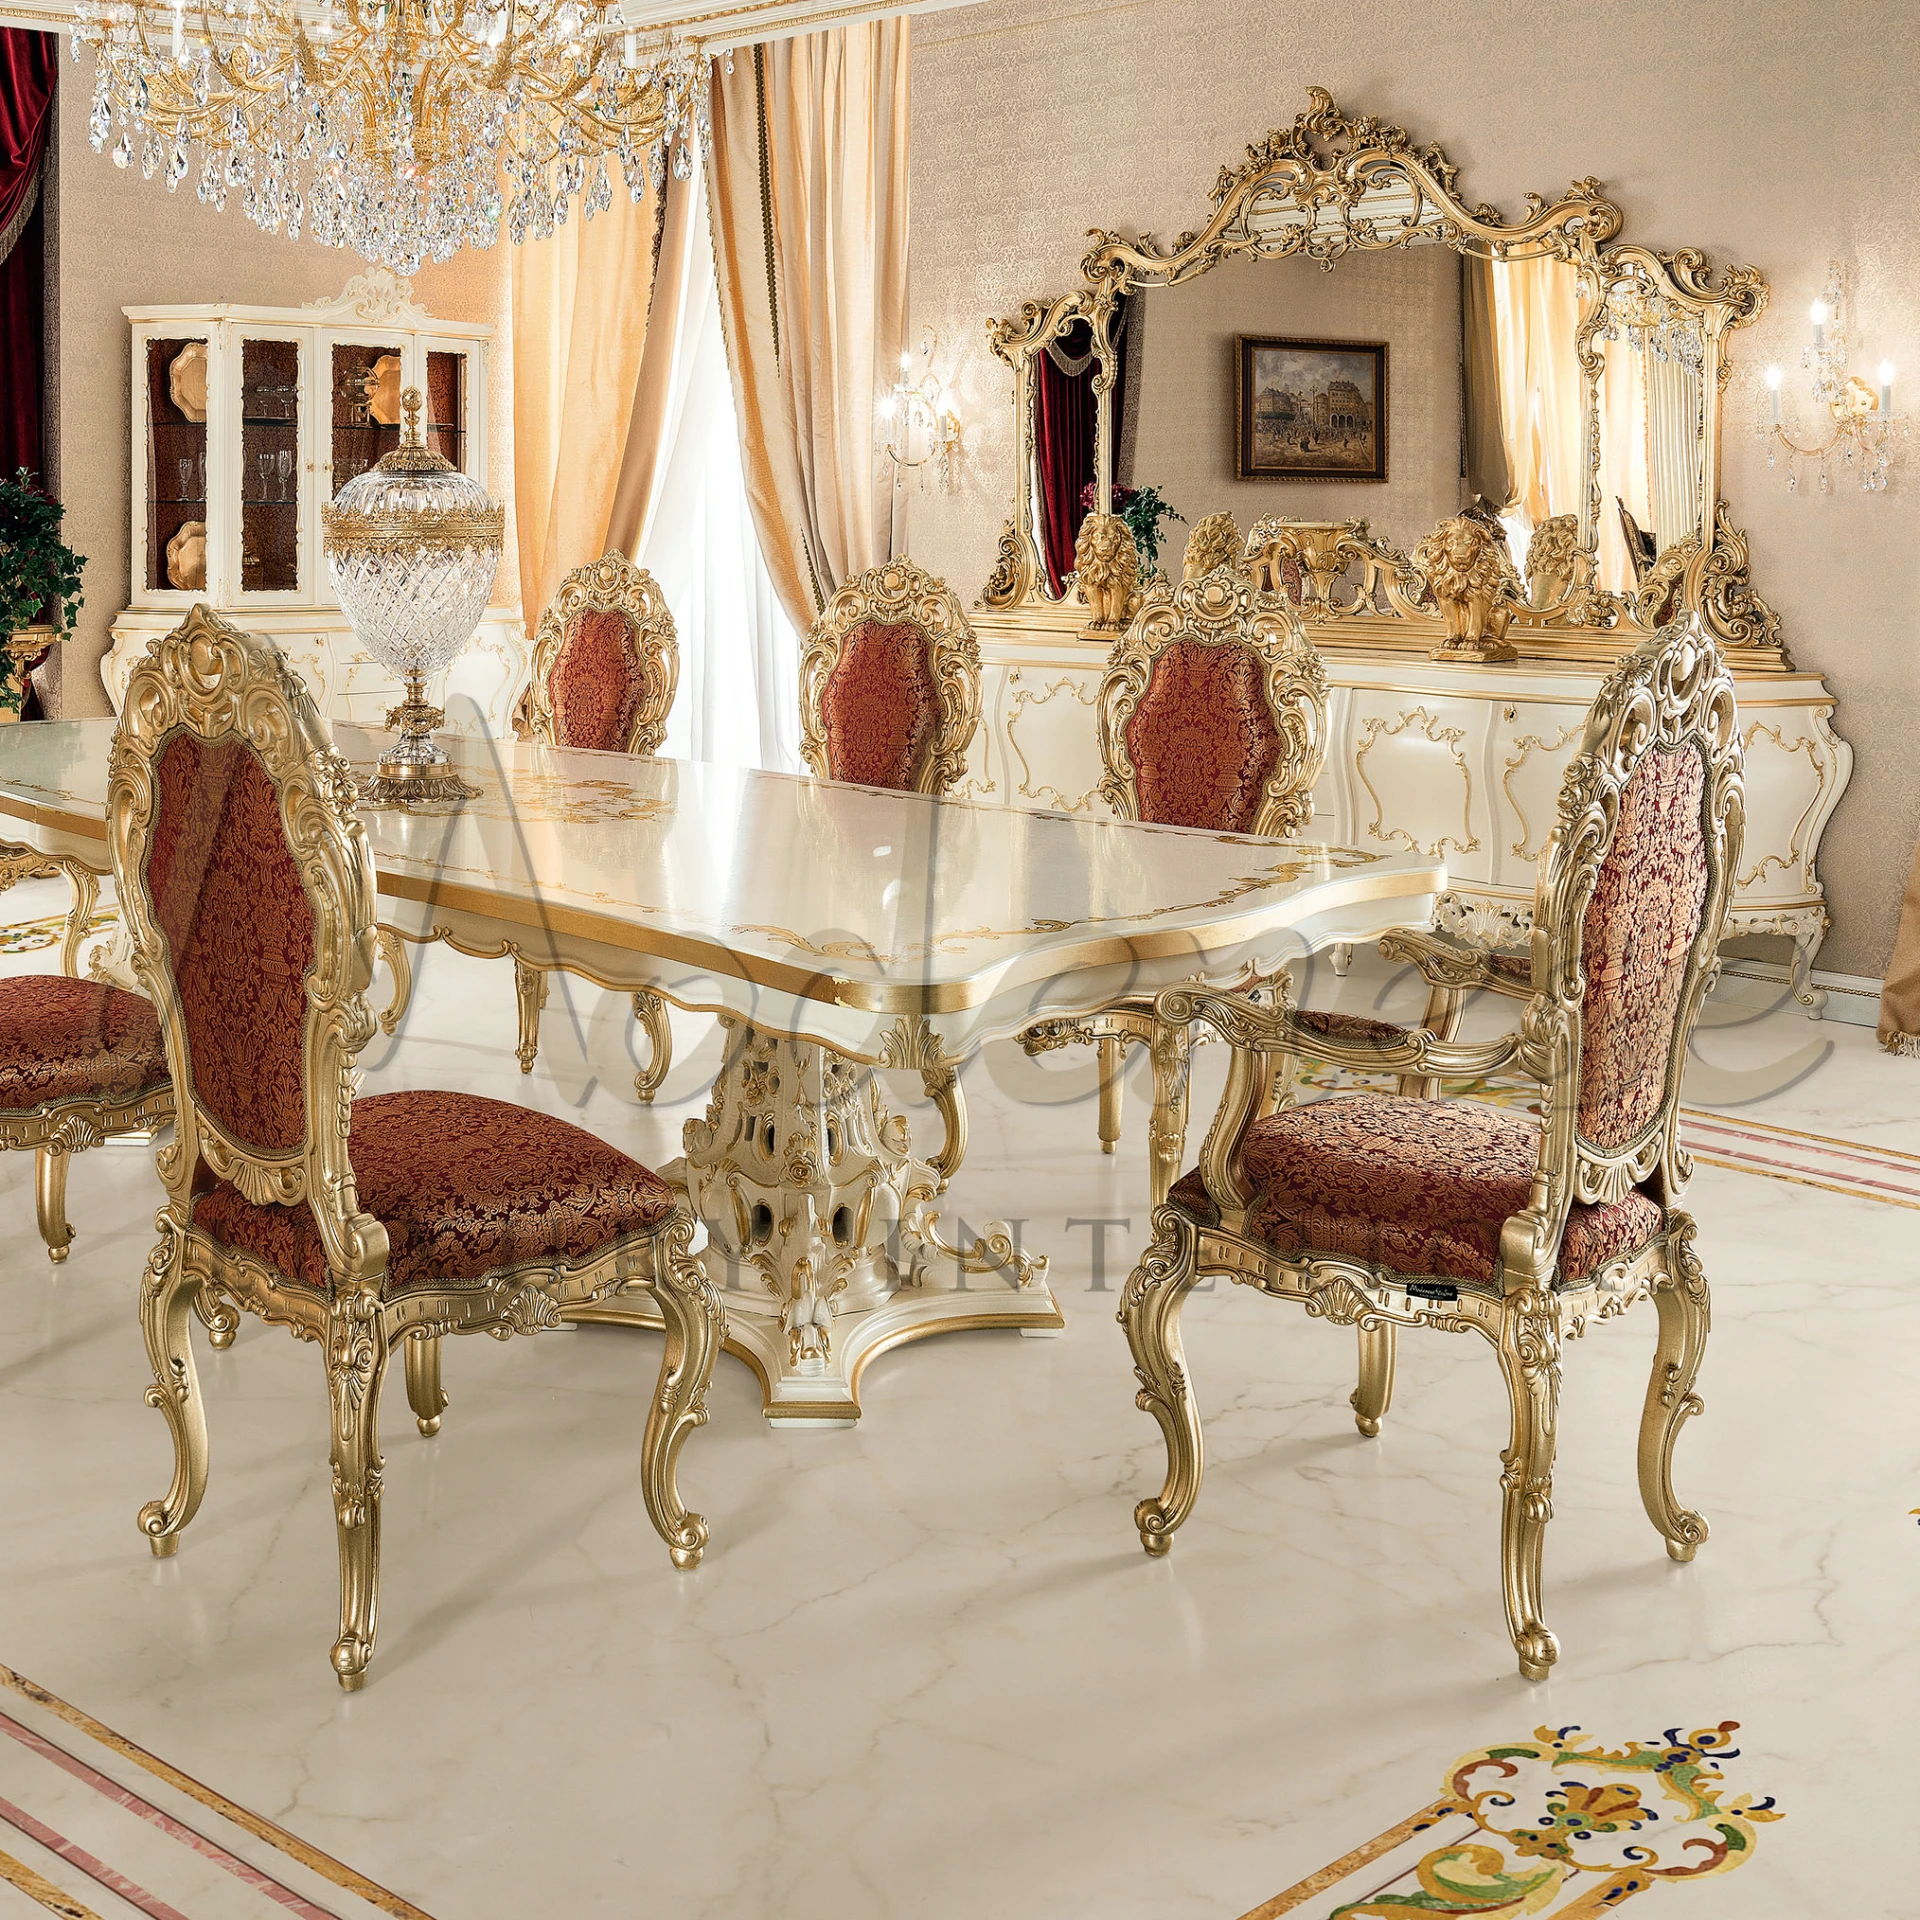 Modenese Versailles Statement Mirror on top of credenza in a royal dining room